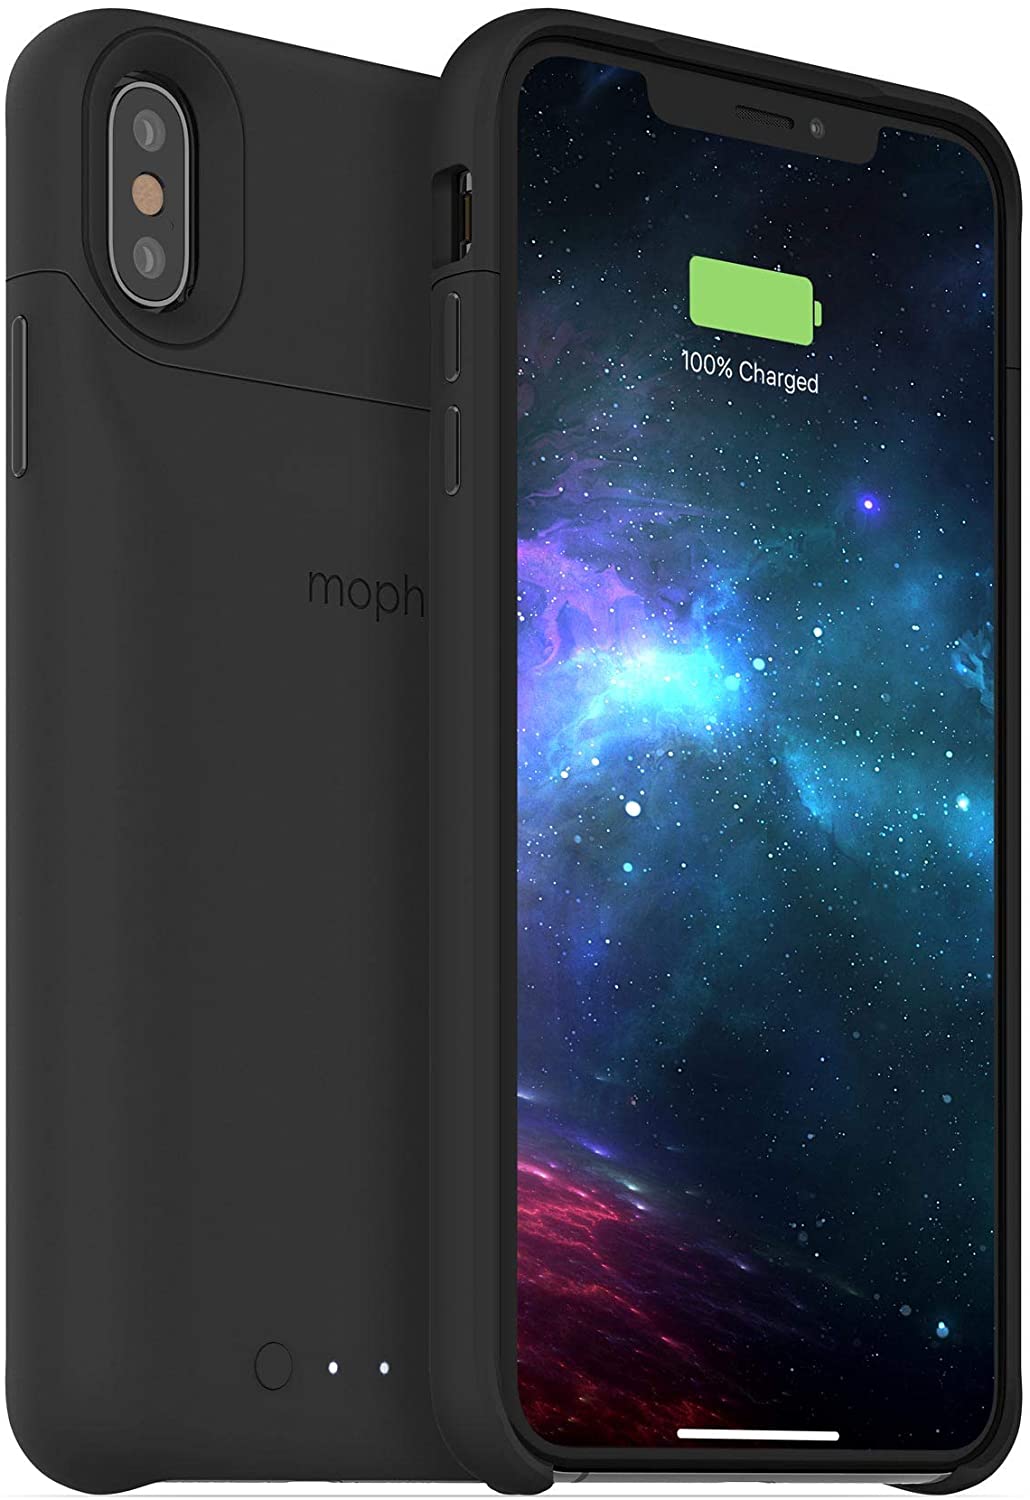 ''Mophie Juice Pack Access - Ultra-Slim Wireless BATTERY Case - Made for Apple iPhone Xs Max (2,200mA